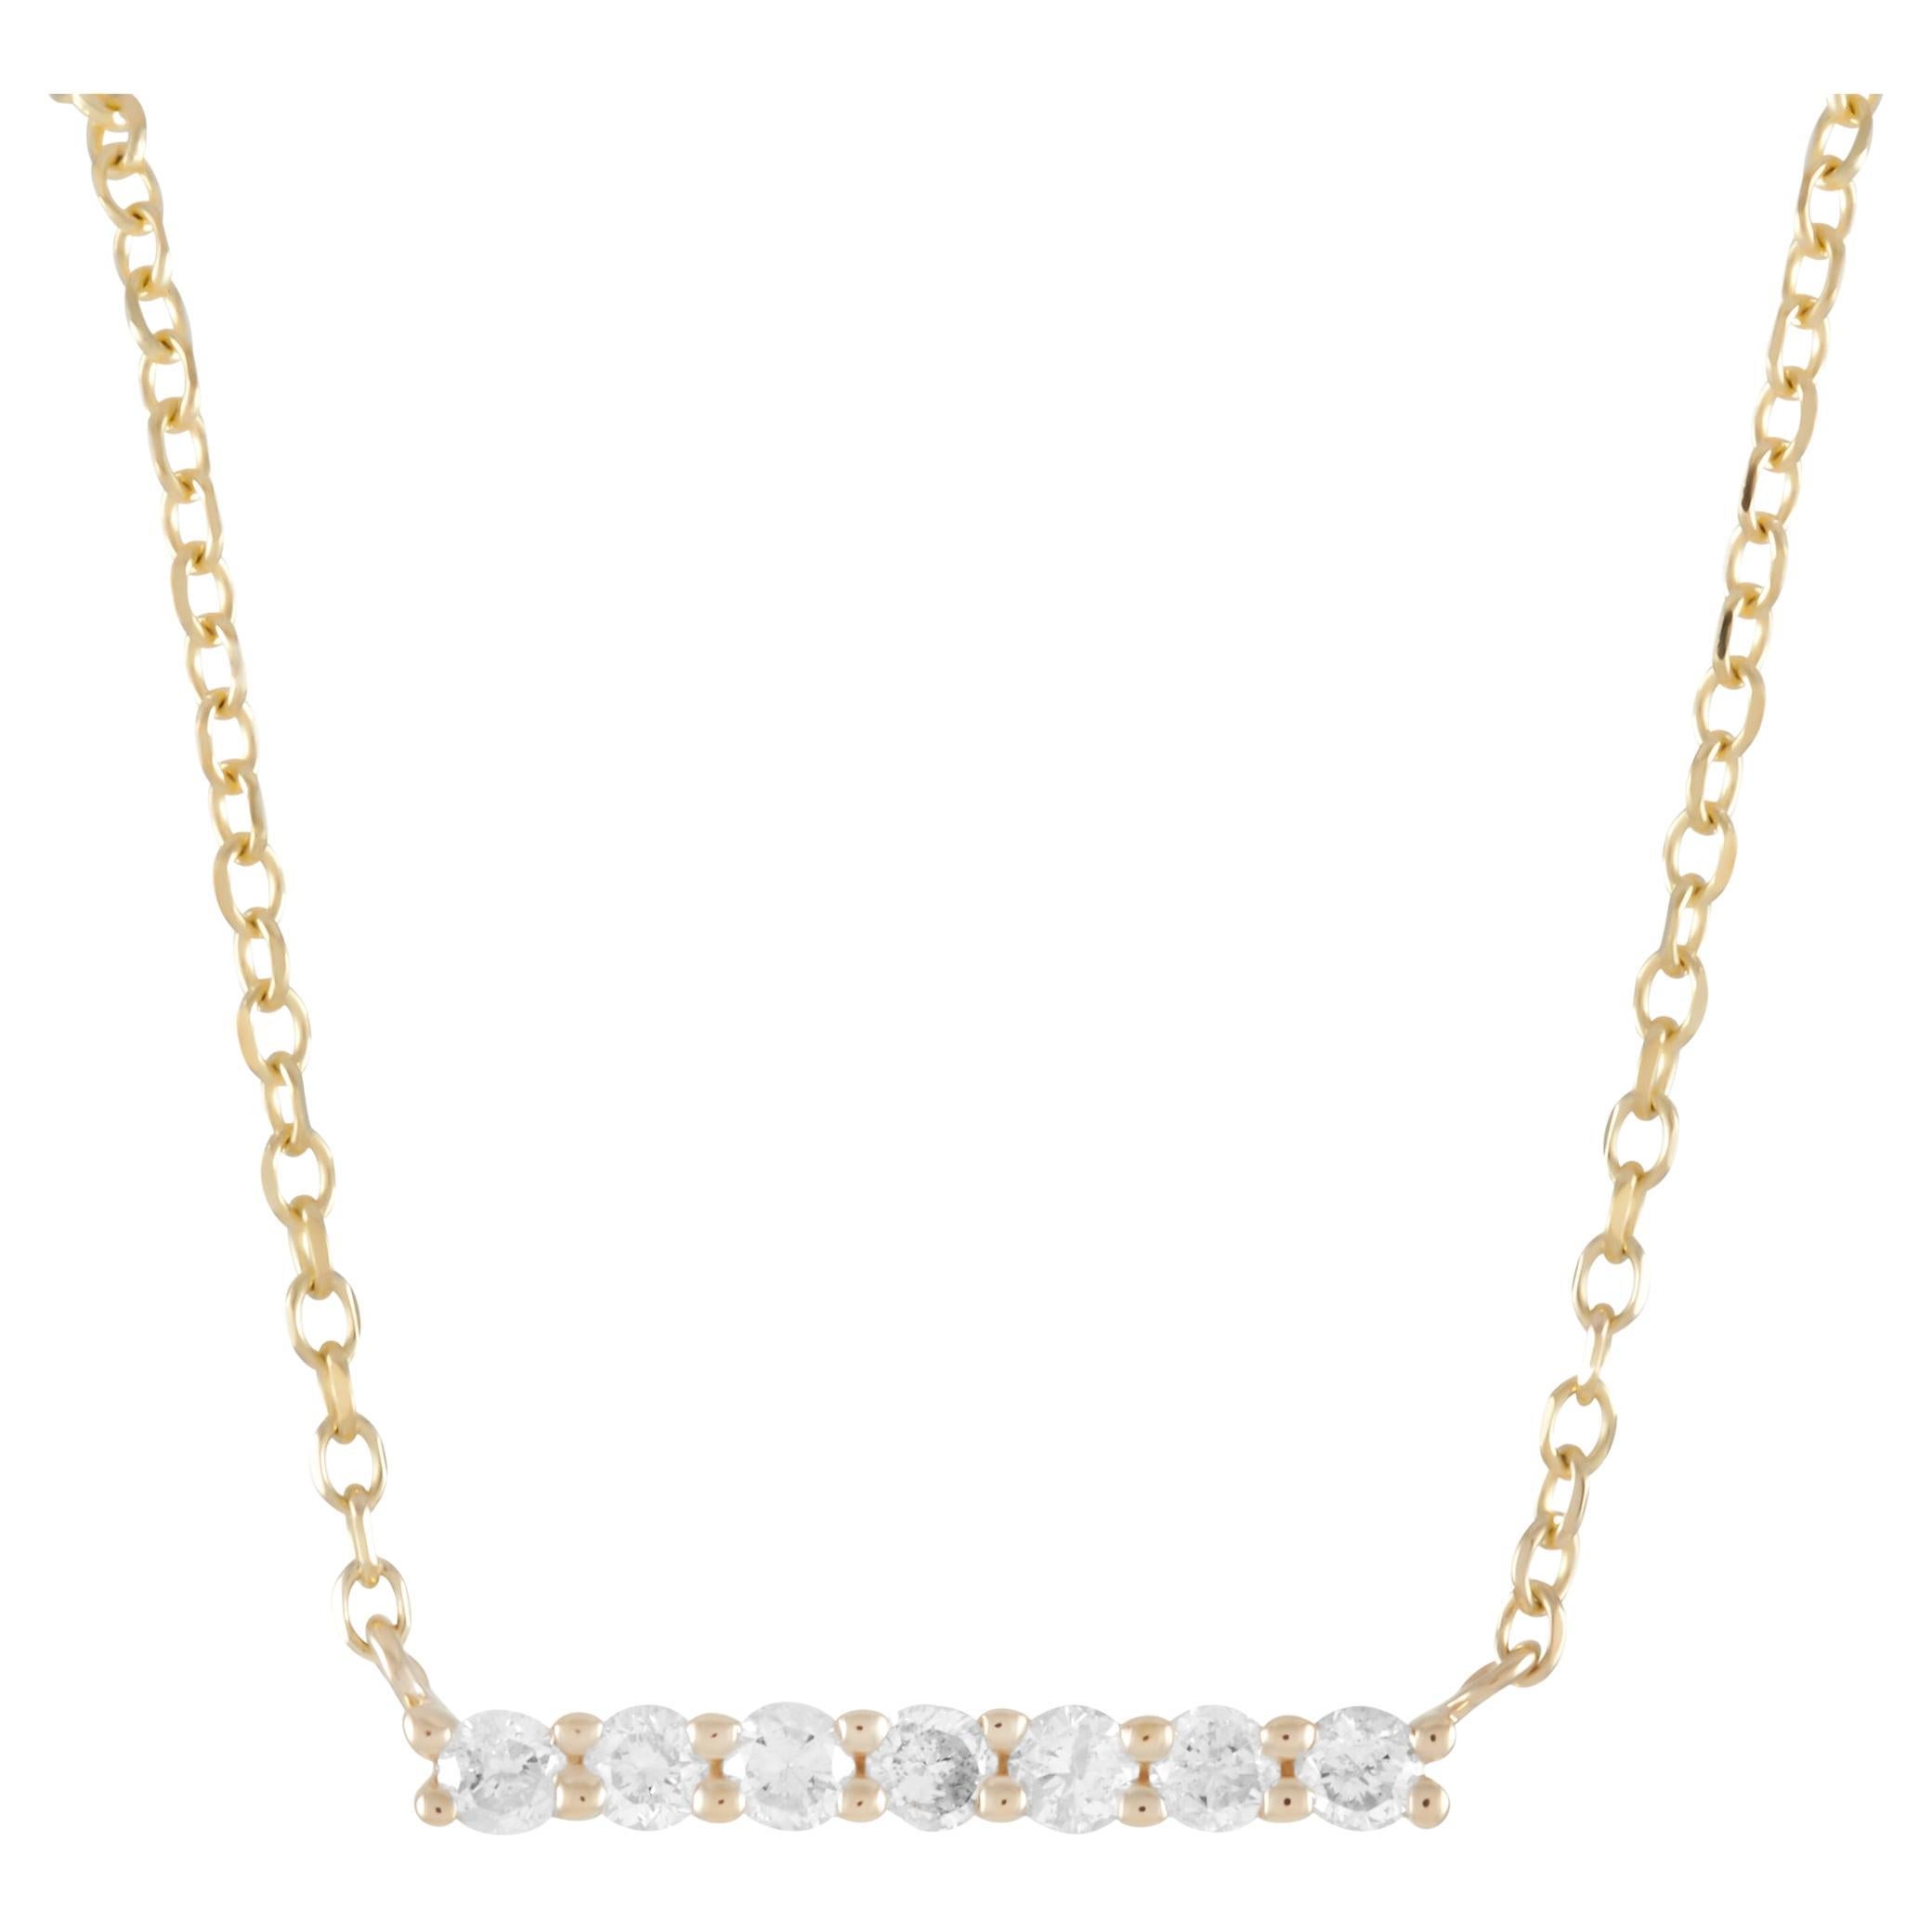 Lb Exclusive 14k Yellow Gold 0.10 Carat Diamond Bar Necklace For Sale